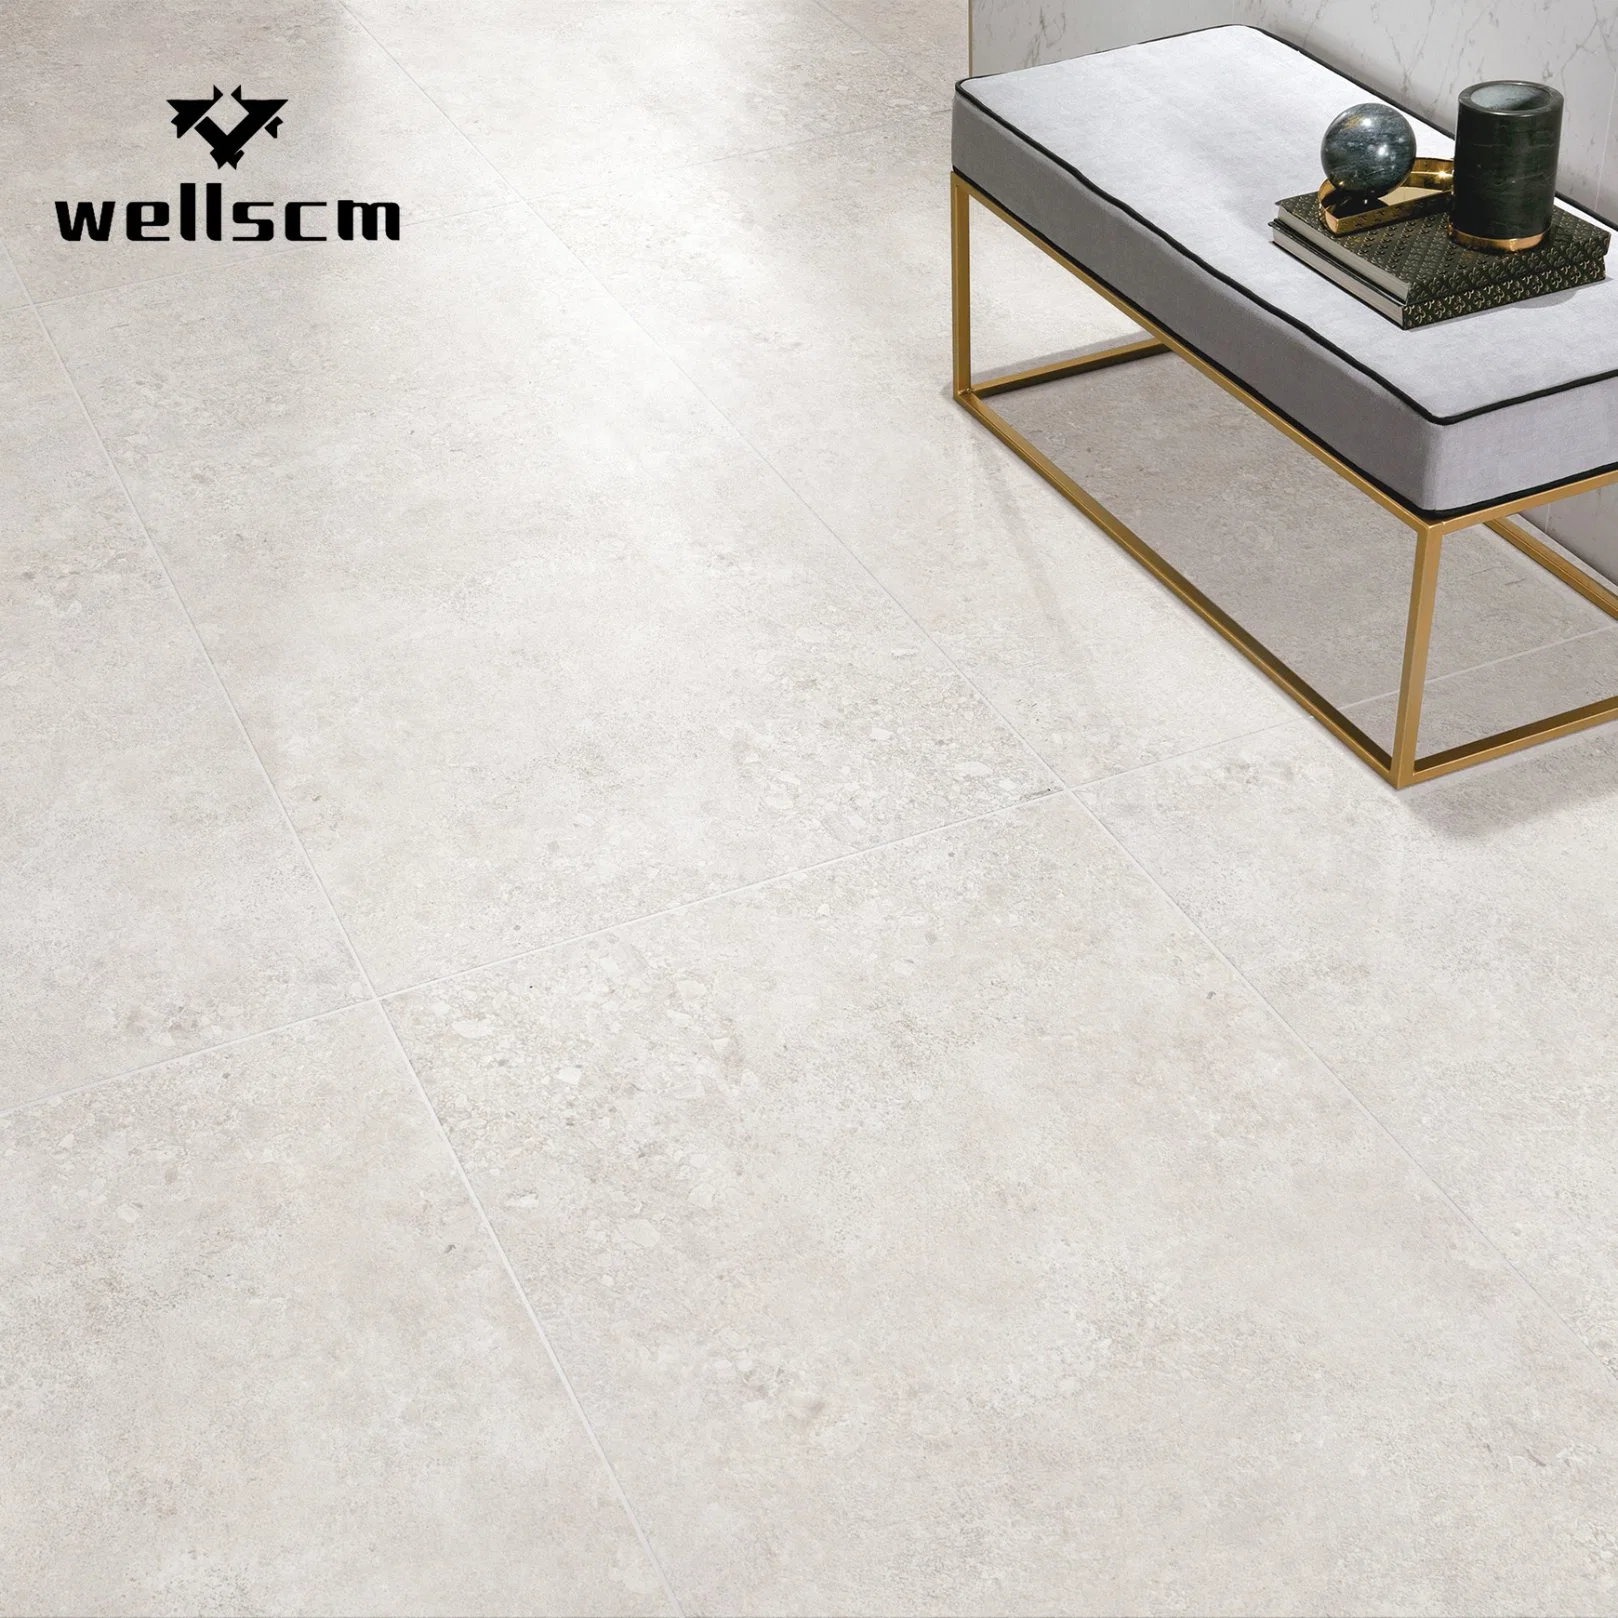 Ceramic Tiles Porcelain Tiles Ceramic Body Natural Clay and Water Absorption Tiles